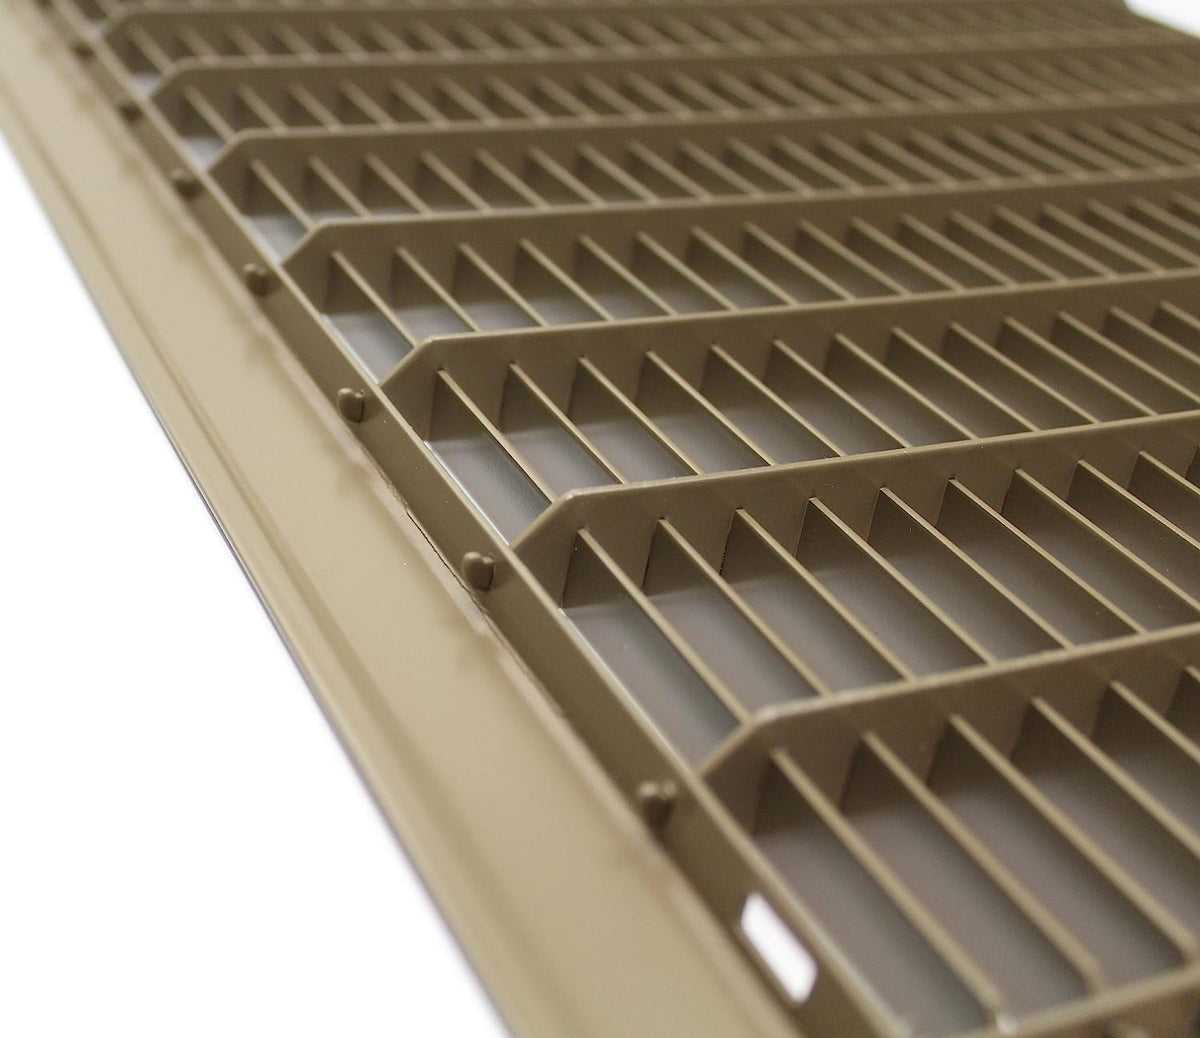 16&quot; X 30&quot; or 30&quot; x 16&quot; Heavy Duty Floor Grille - Fixed Blades Air Grille - Brown [Outer Dimensions: 17.75 X 31.75]